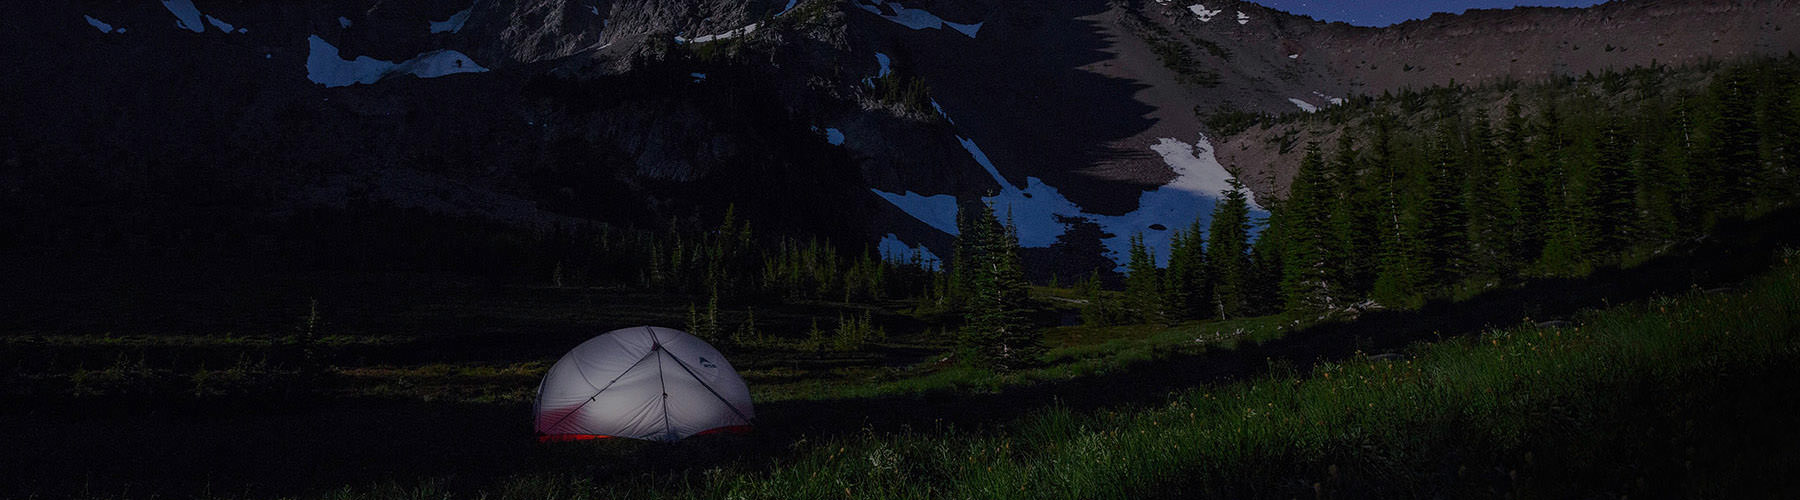 Camping tent pitched high in the snow capped mountains at night with stars twinkling in the skies.